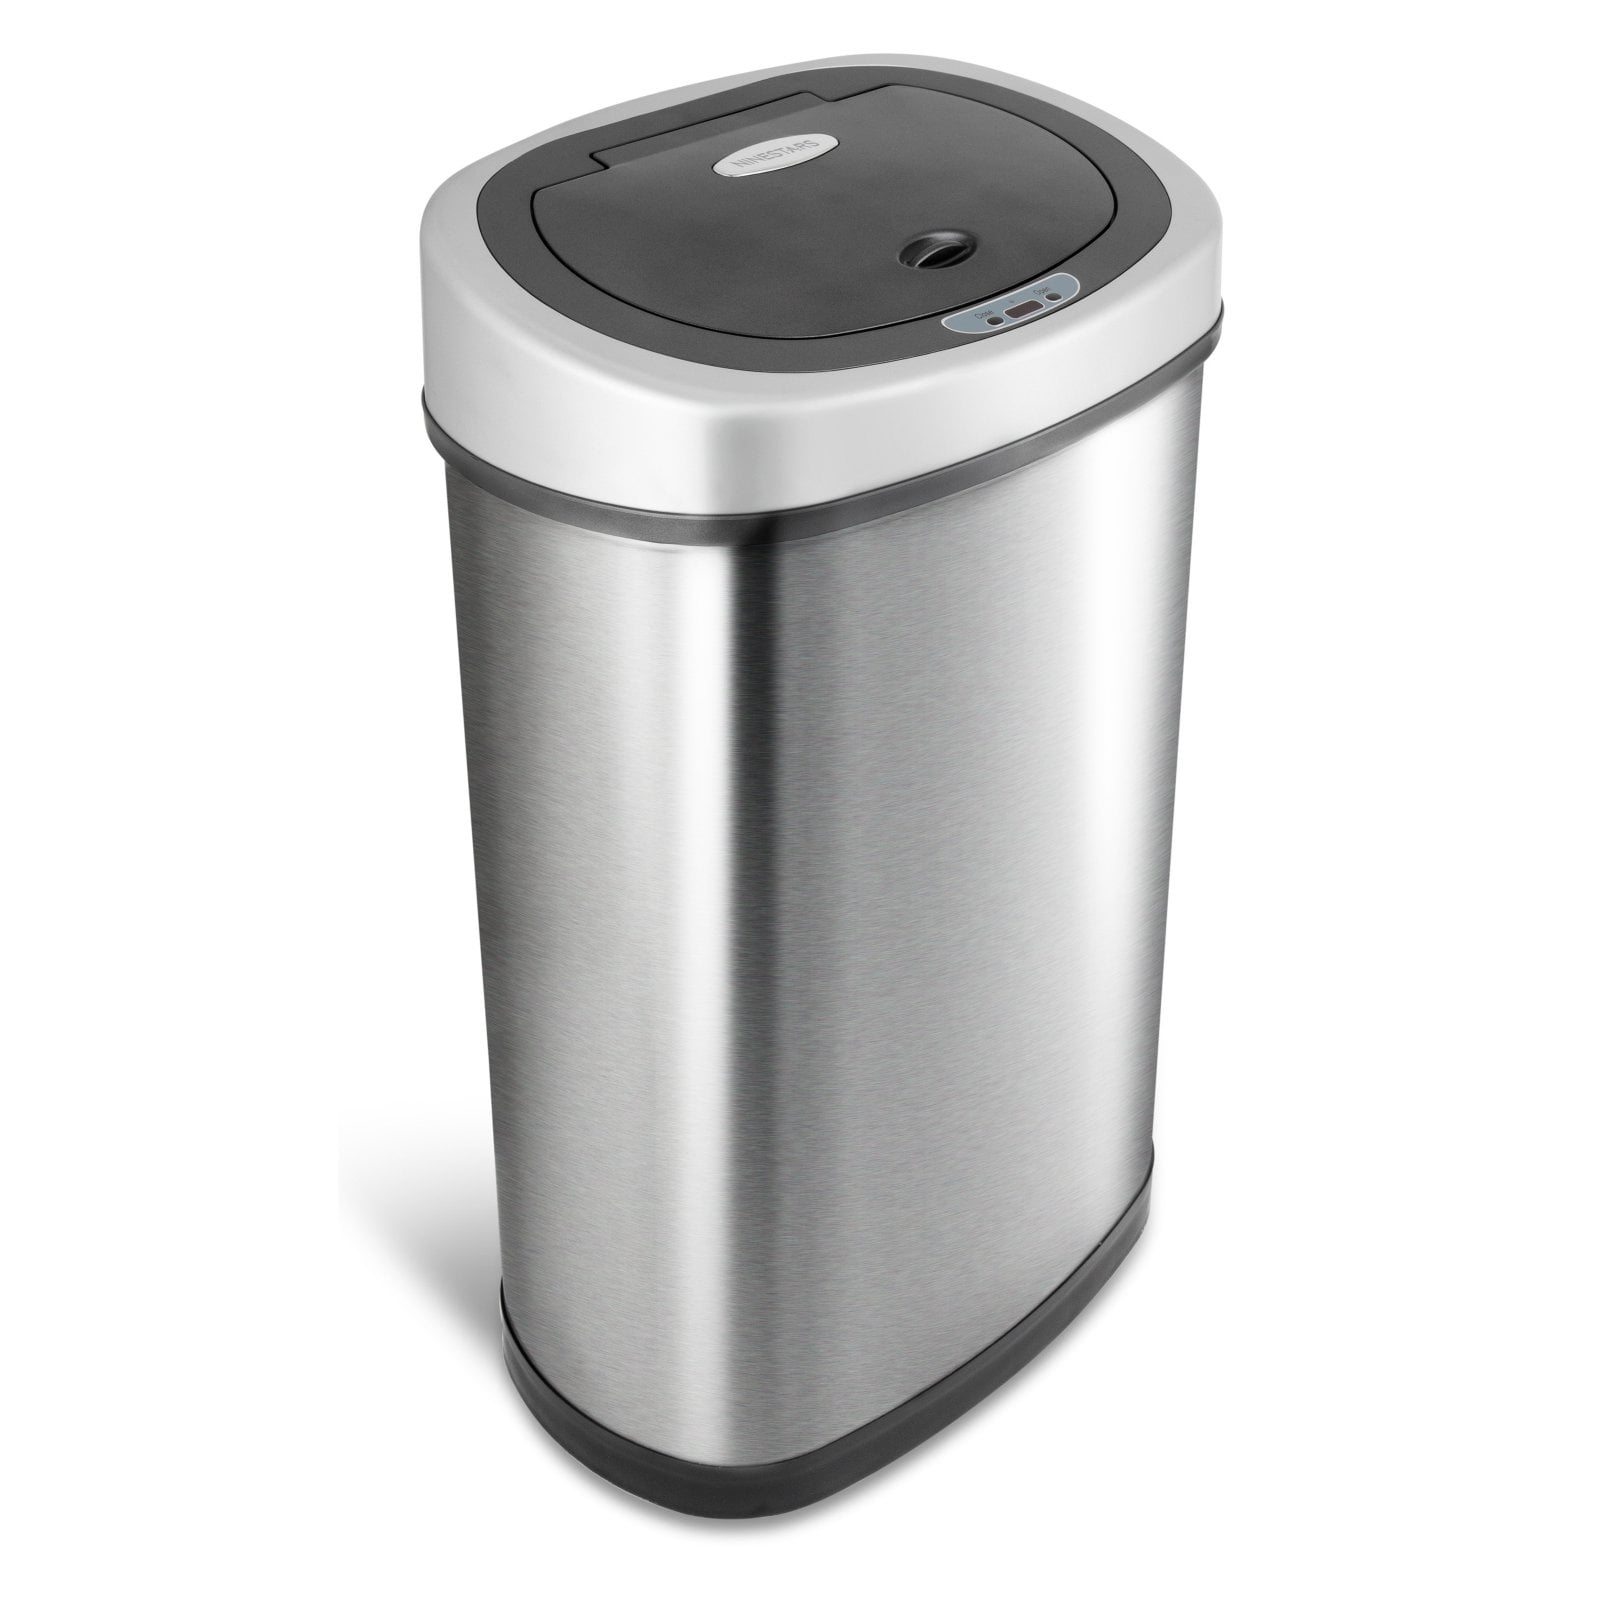 Mainstay MS-50-22 Motion Sensor Trash Can 13.2 Gallon Stainless Steel for sale online 